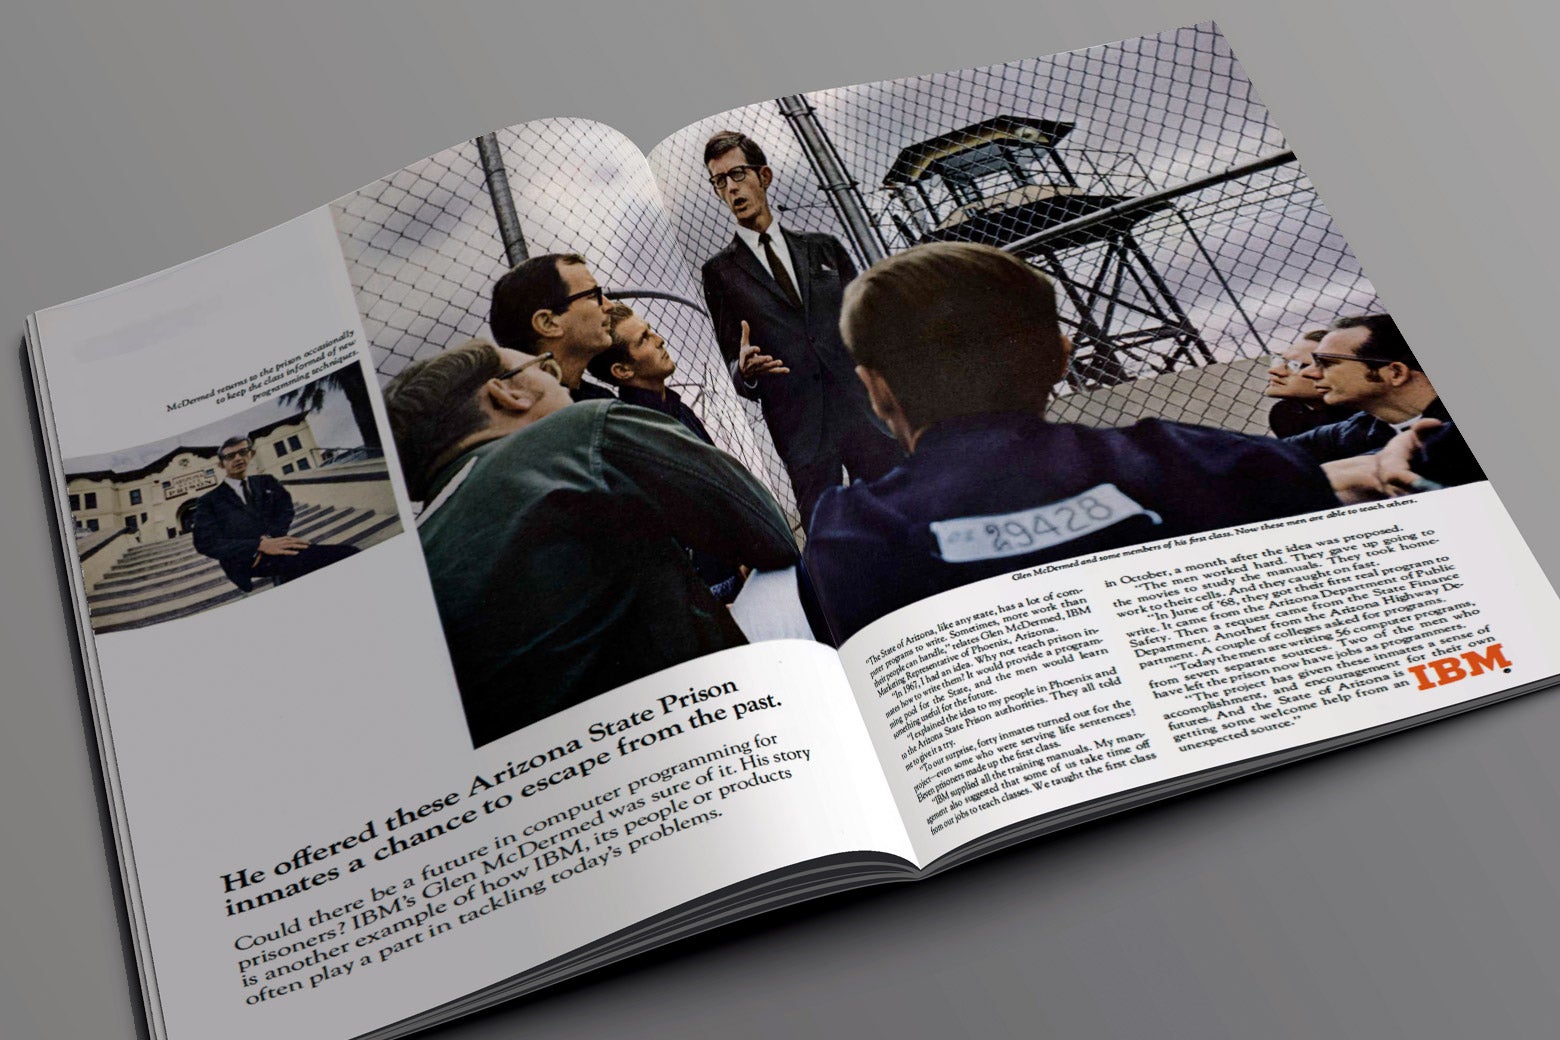 An illustration of a magazine, overlaid with a real magazine ad that reads, "He offered these Arizona State Prison inmates a chance to escape from the past." The ad includes a photo of a man in a suit, talking in front of a group of men in prison uniforms.